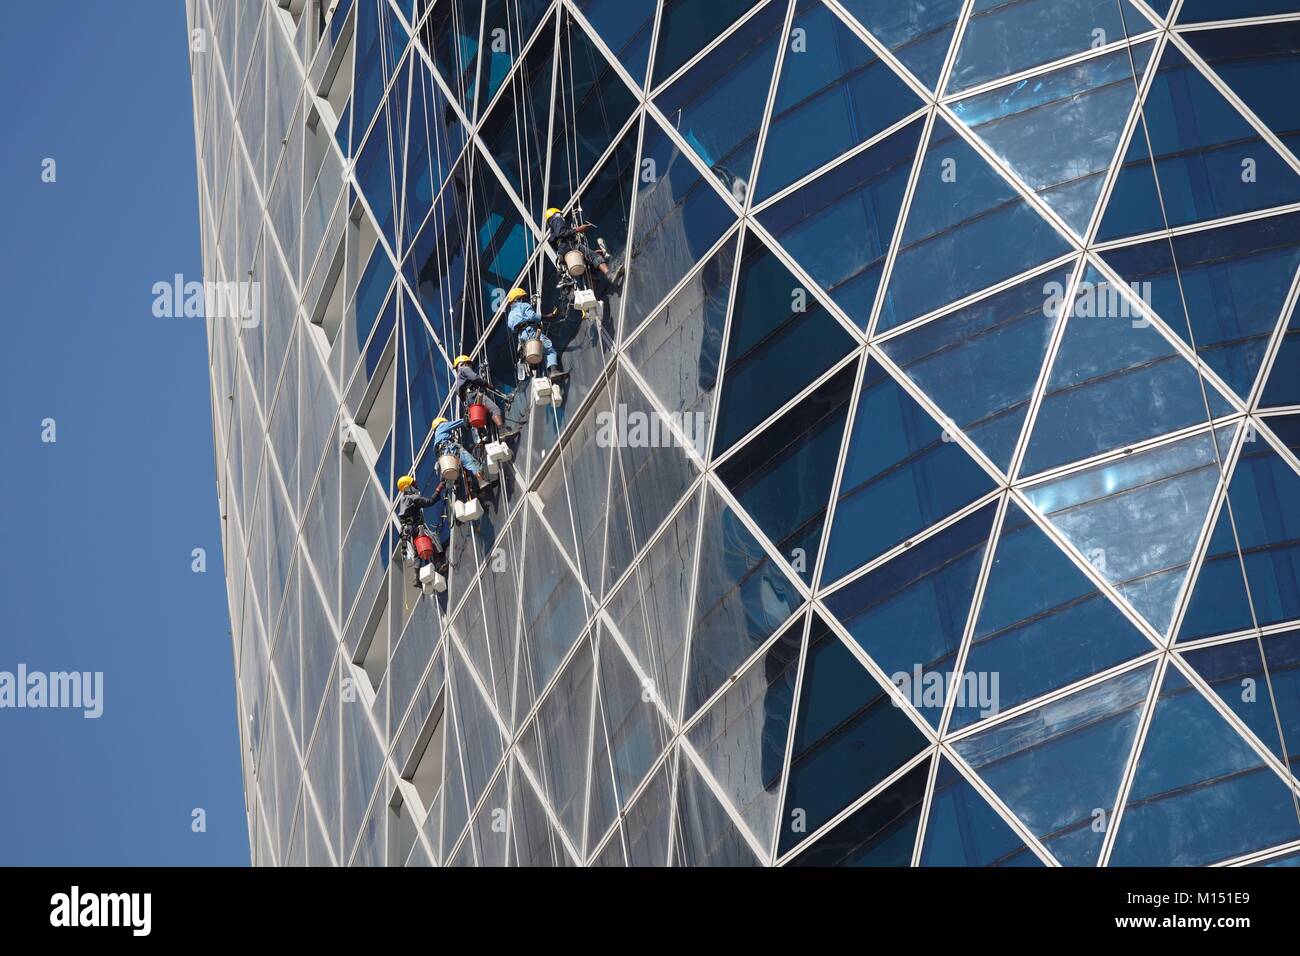 United Arab Emirates, Dubai, DIFC, cleaners on Park Towers by Damac after desert storm Stock Photo